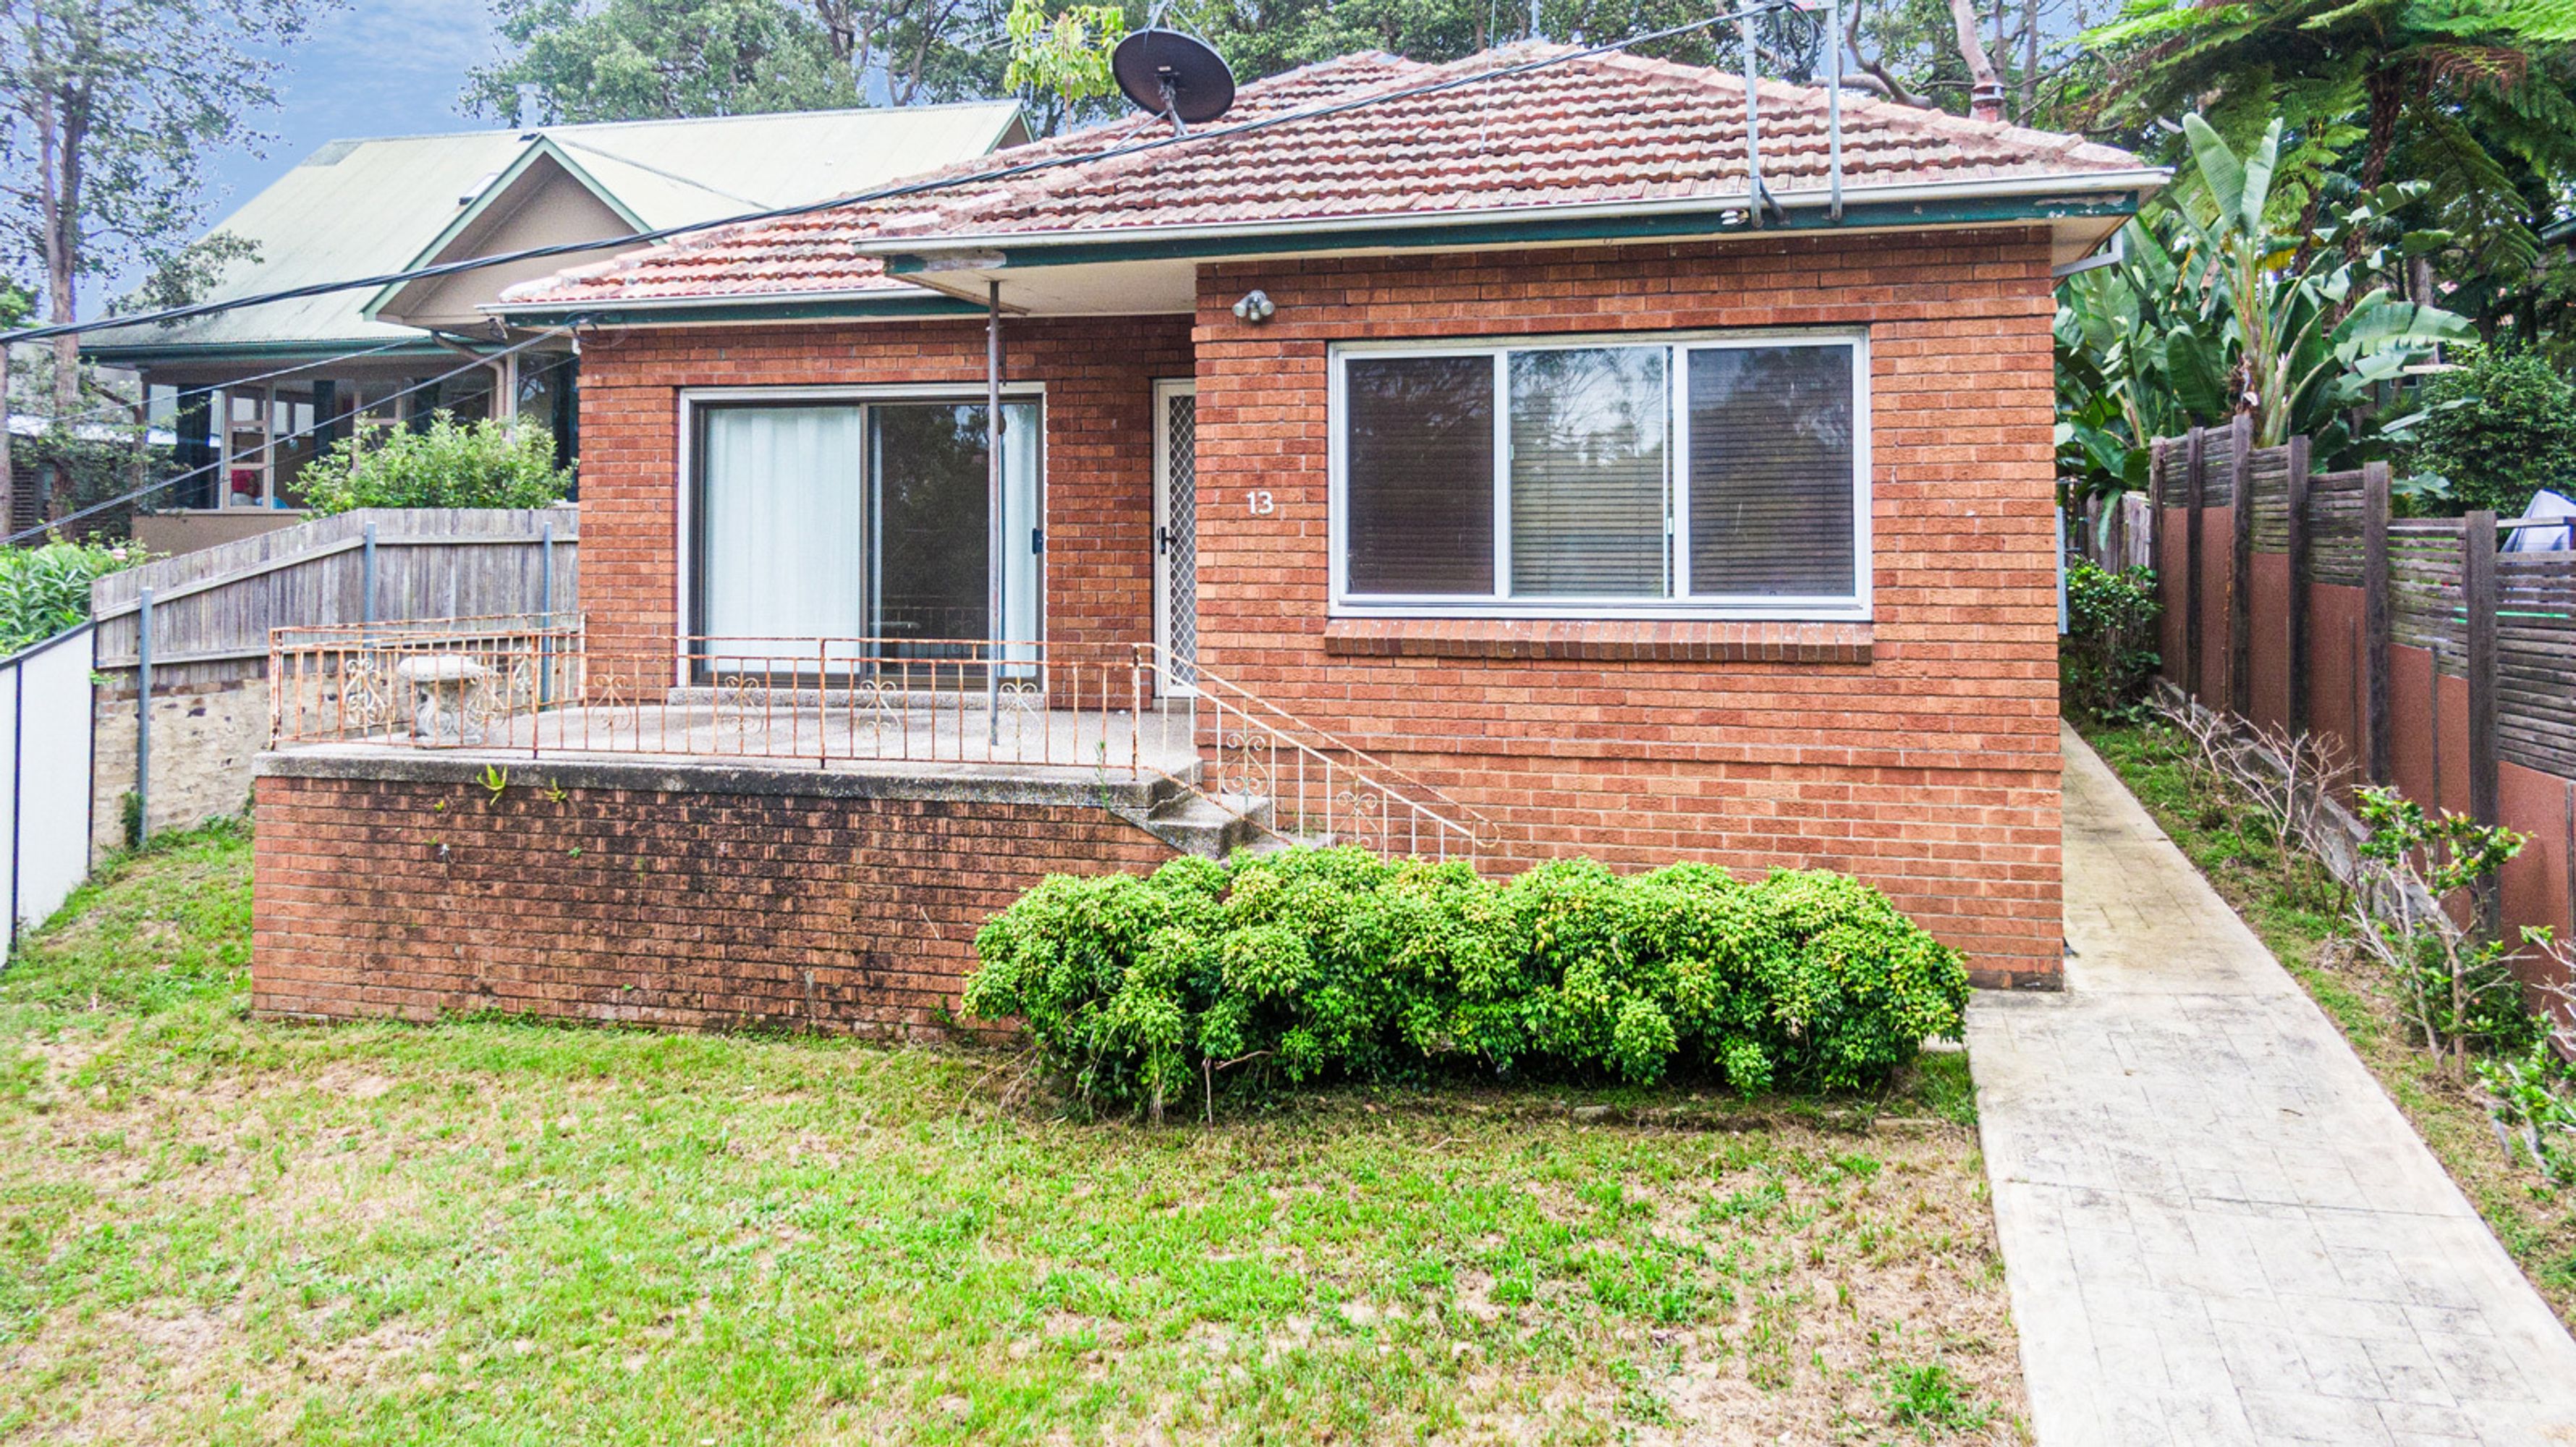 13 Pidding Road, Ryde, NSW 2112